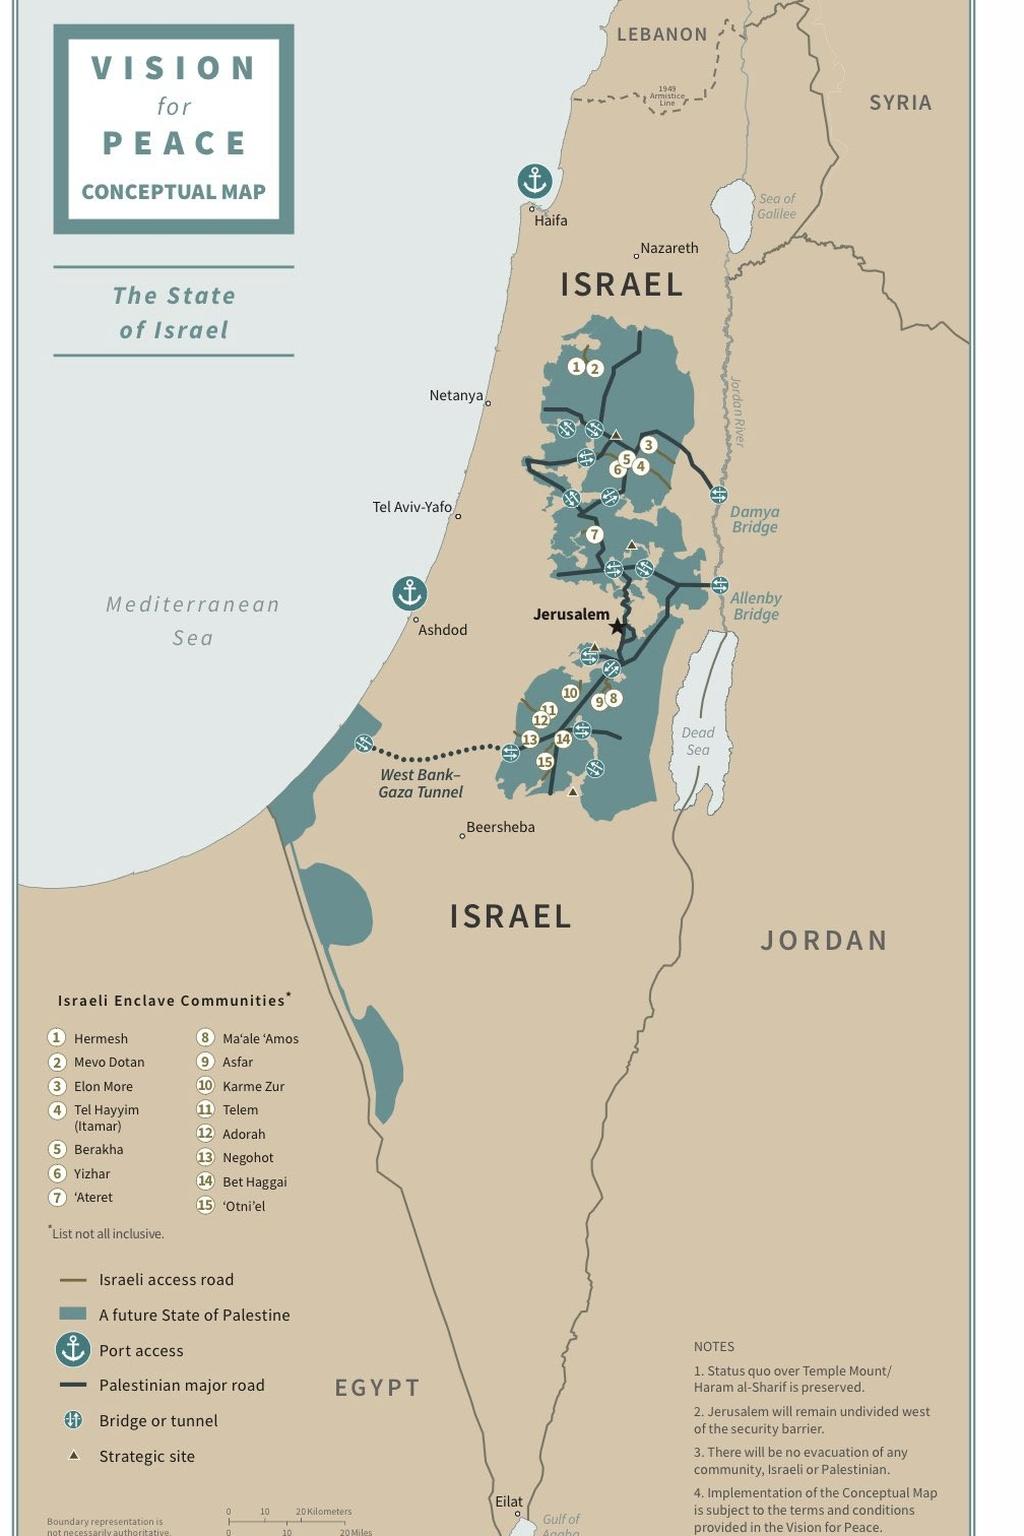 Conceptual map of Israel-Palestine as proposed in Trump peace plan